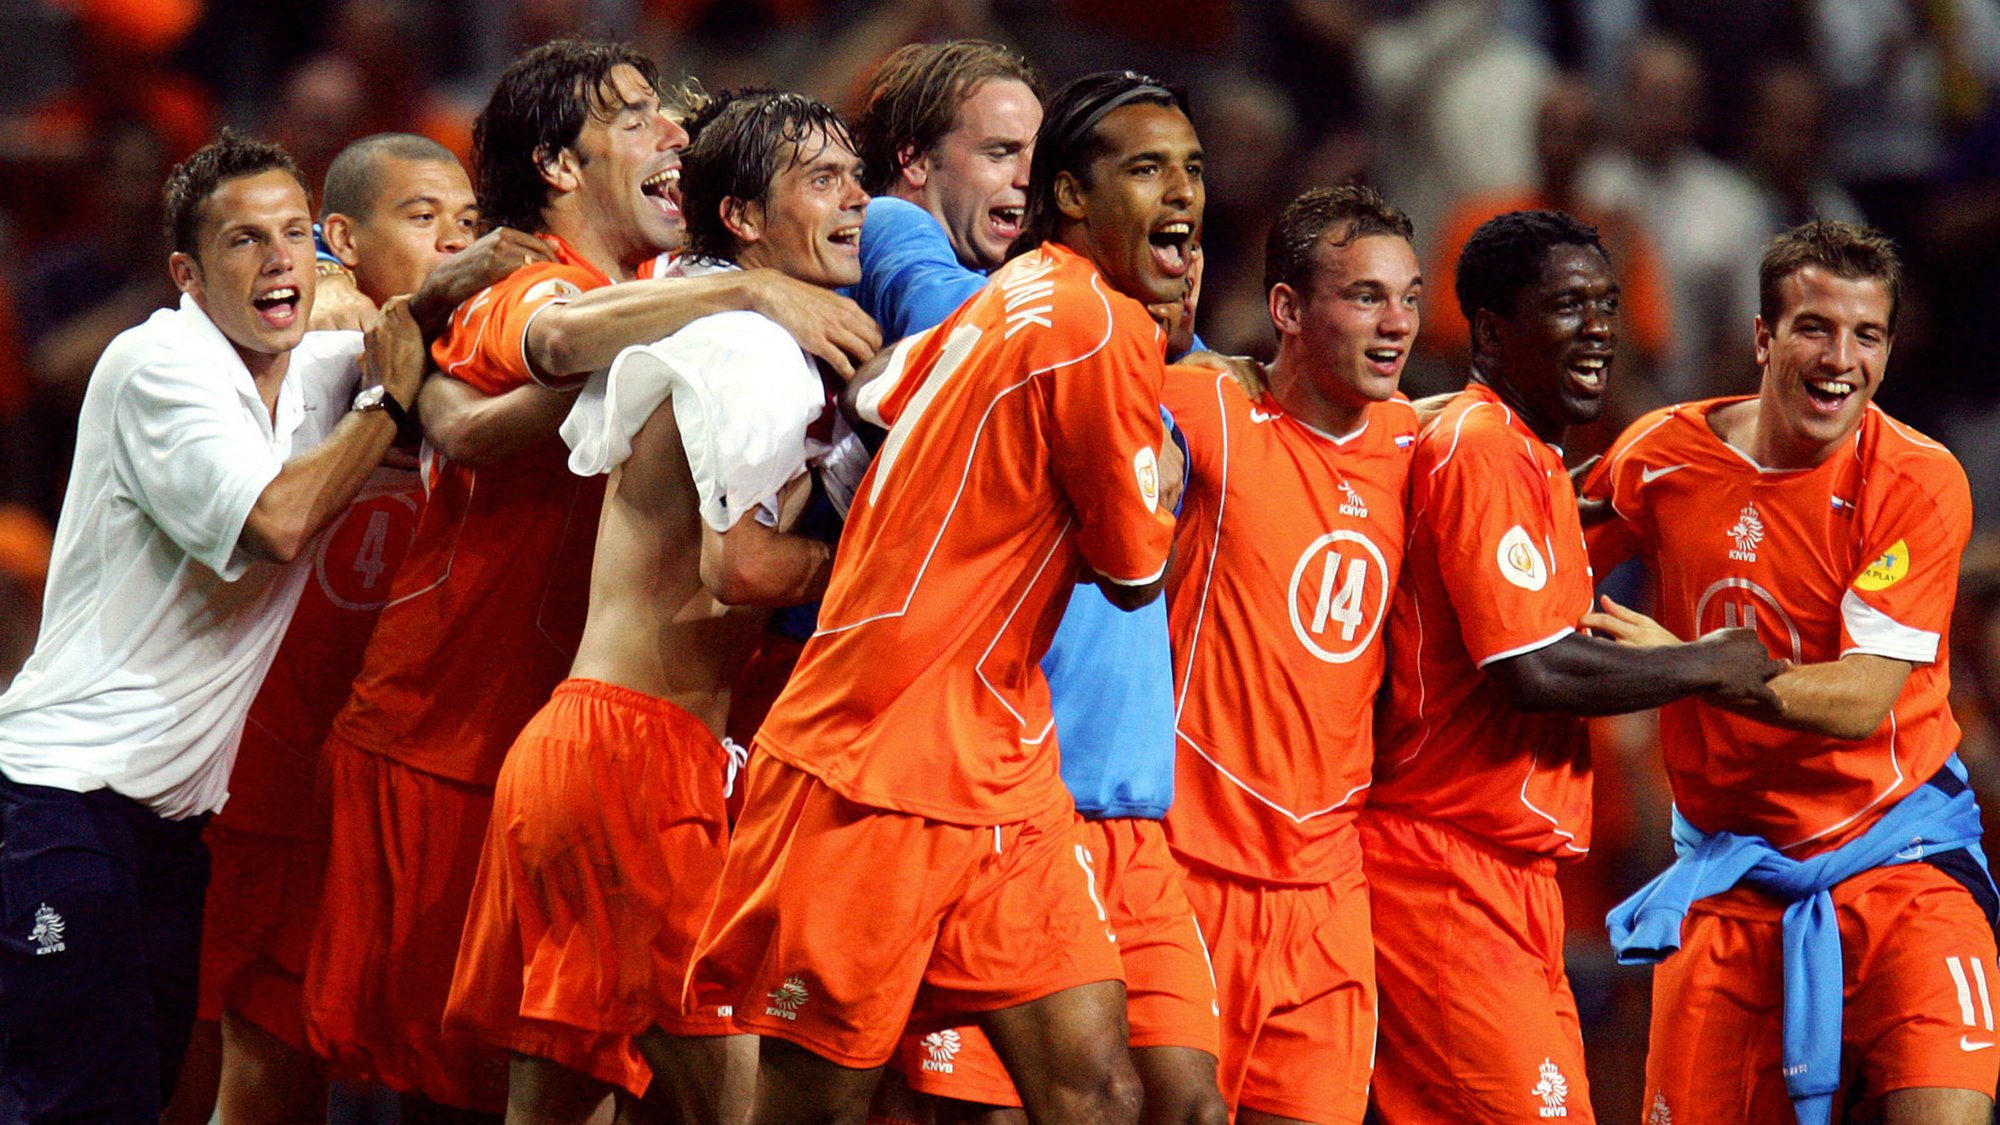 Celebrating players of the Dutch national team